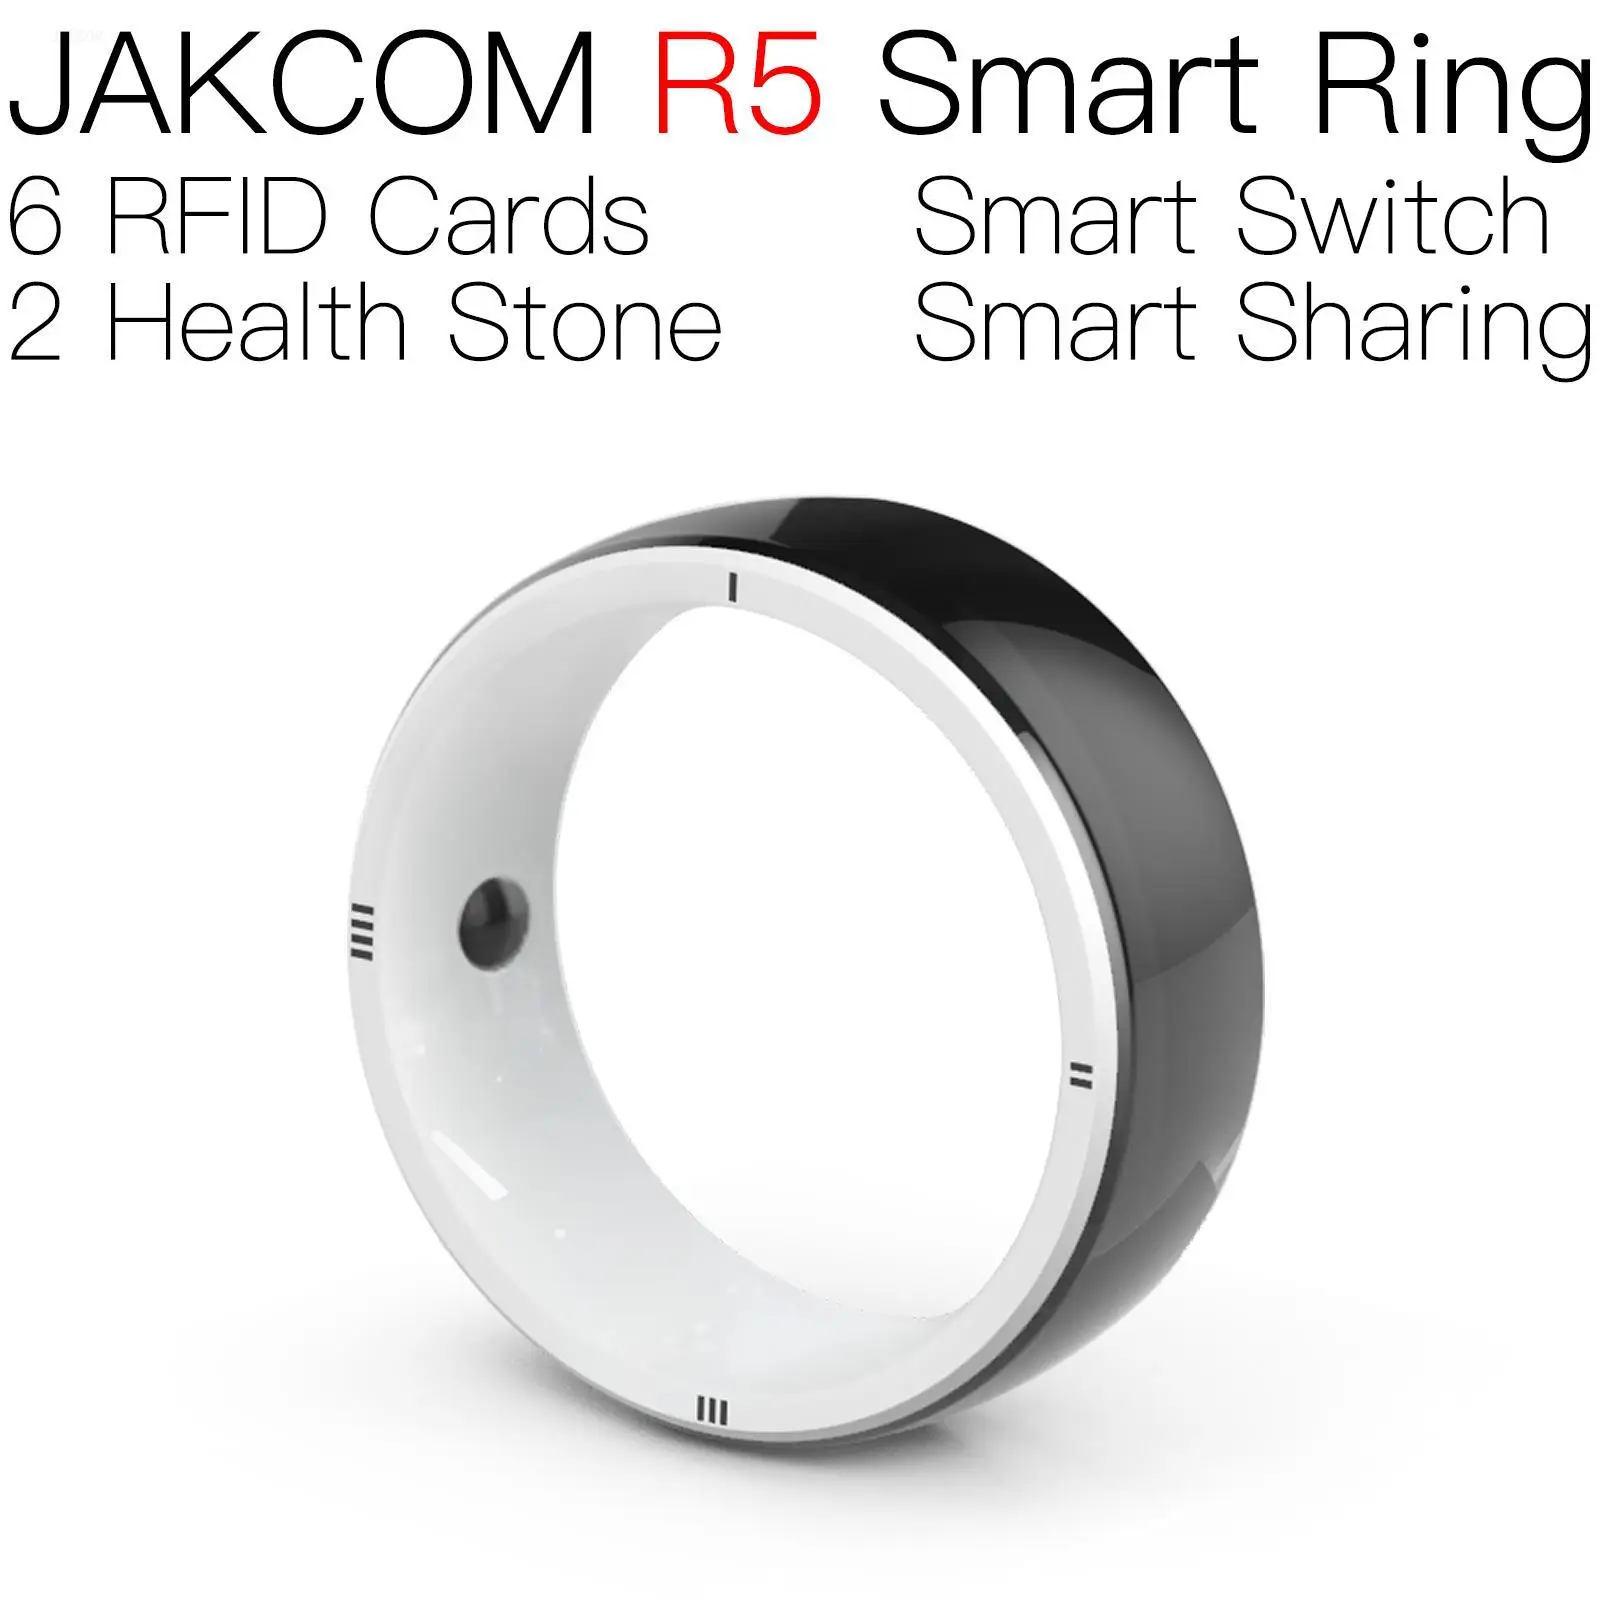 

JAKCOM R5 Smart Ring New product as rfid label 125khz protection des pieds dual wrist band badche black 25mm gen2 cardboard nfc